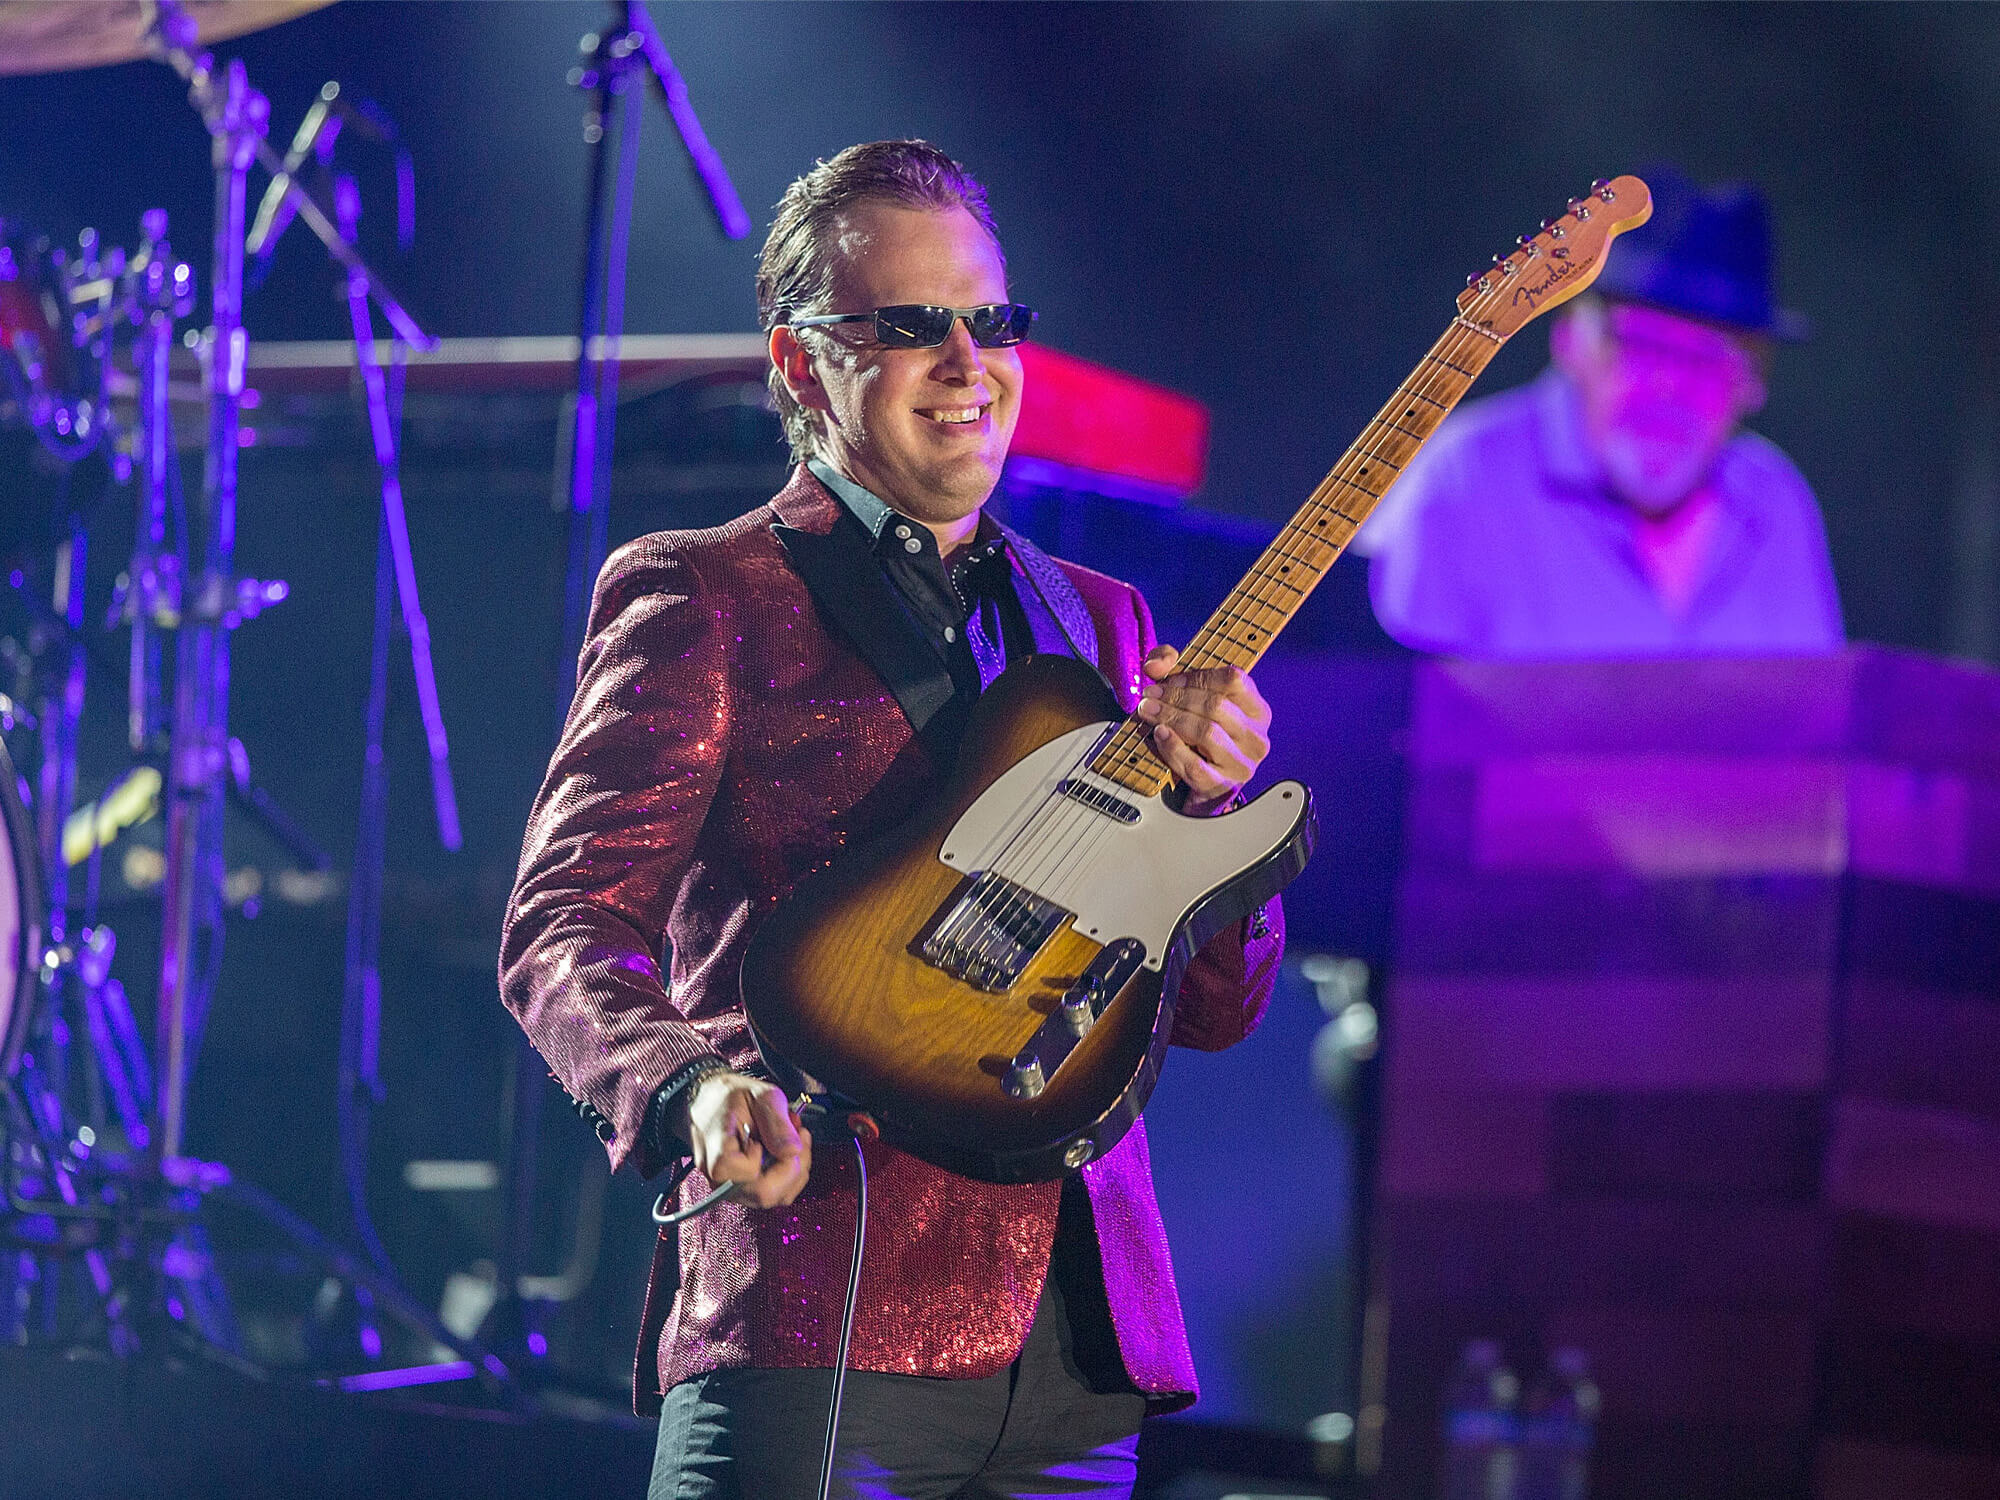 Joe Bonamassa on stage. He is holding up a Telecaster guitar and smiling. He is wearing a red suit jacket and blacked-out sunglasses.